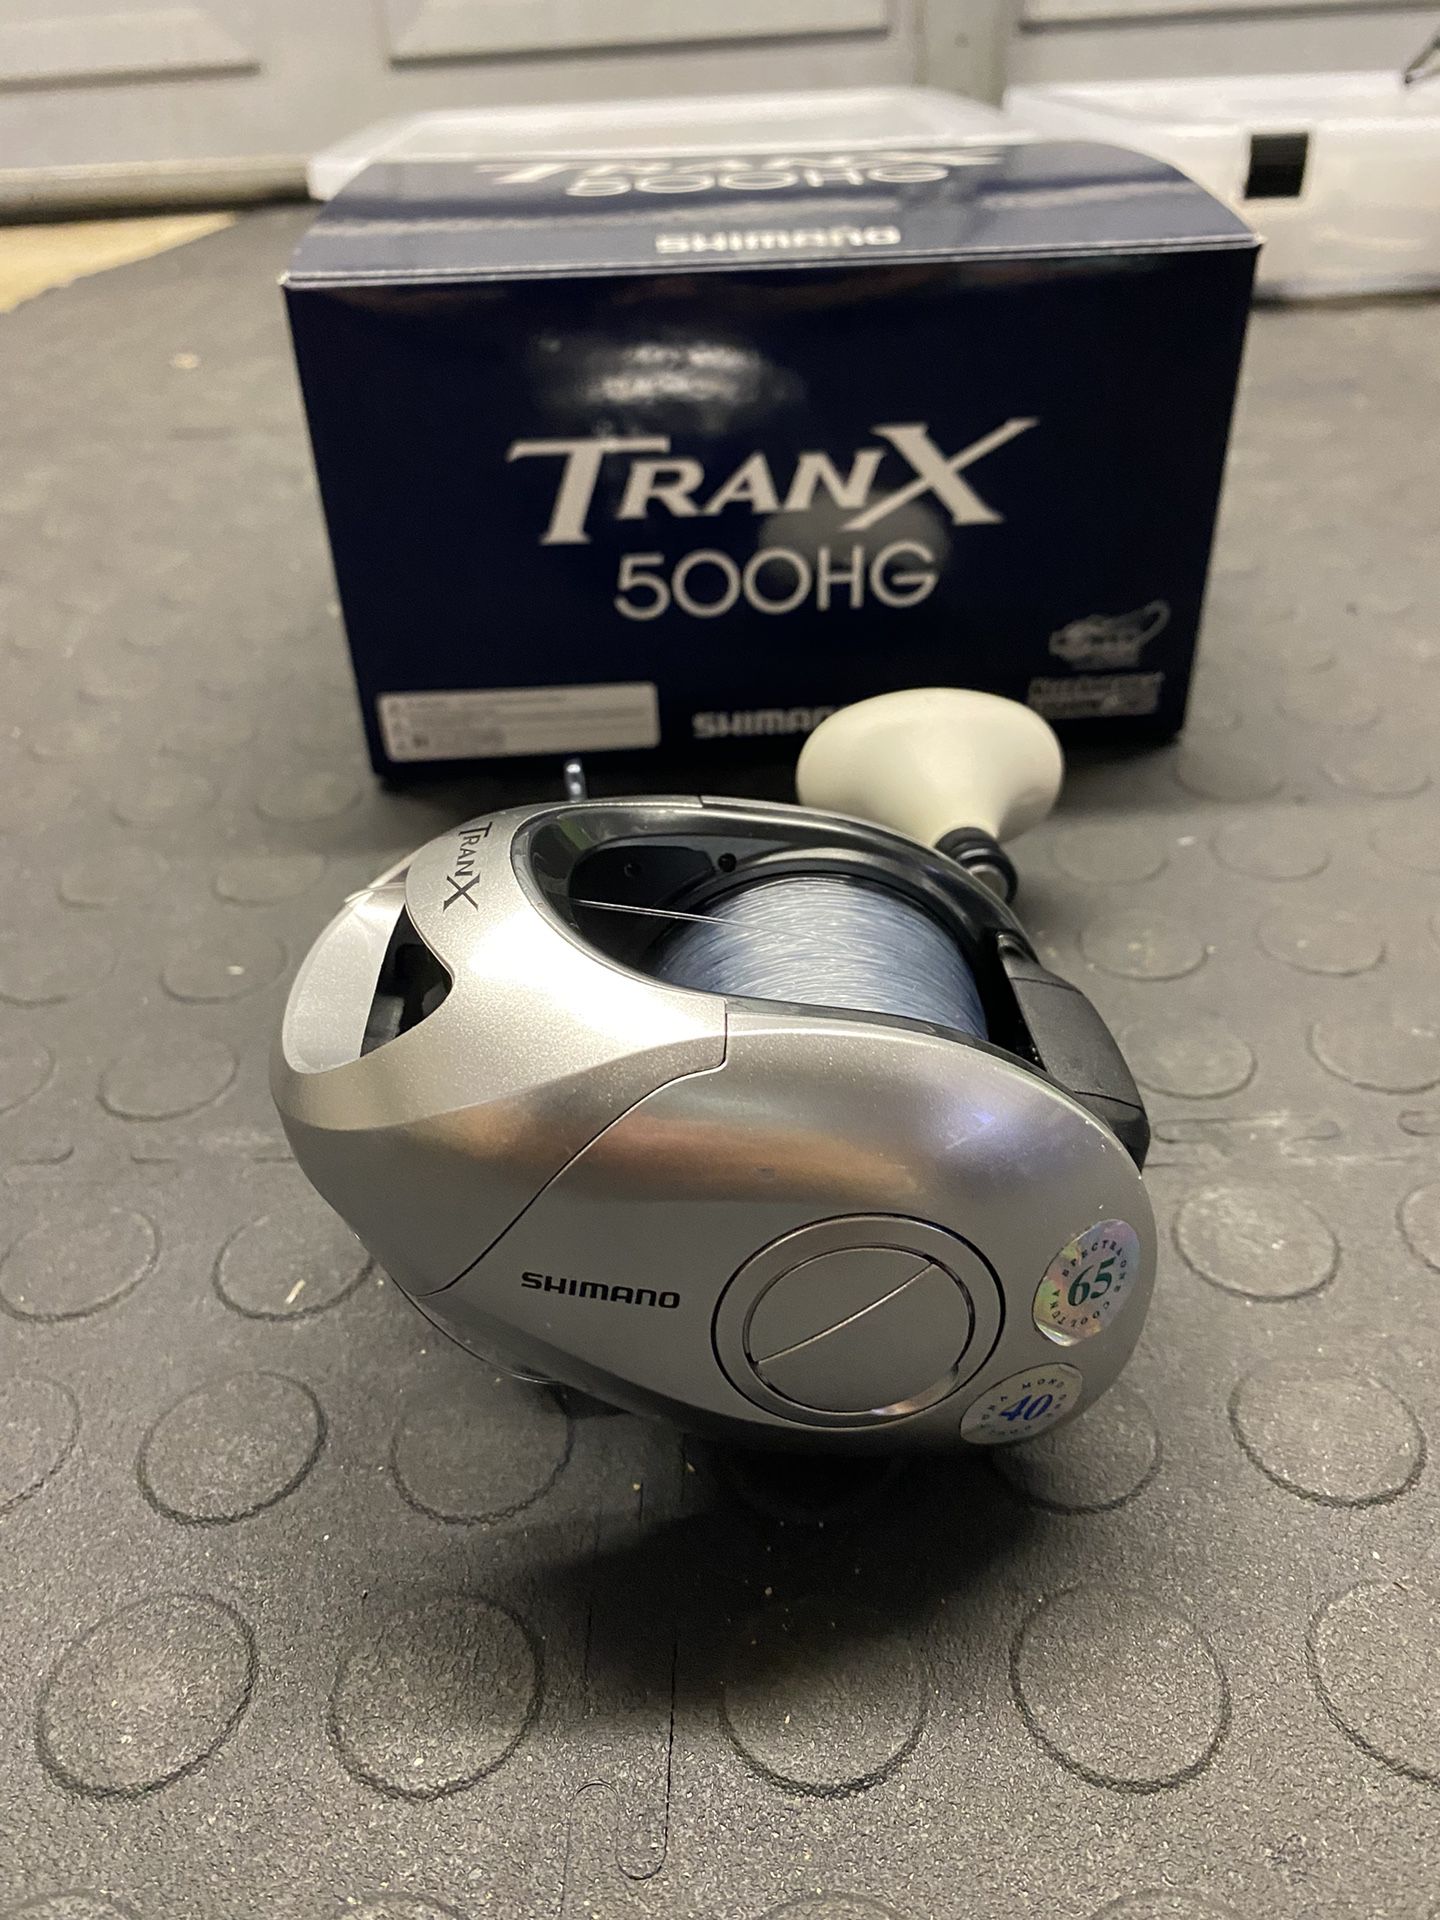 Shimano TRANX 500 HG for Sale in San Diego, CA - OfferUp